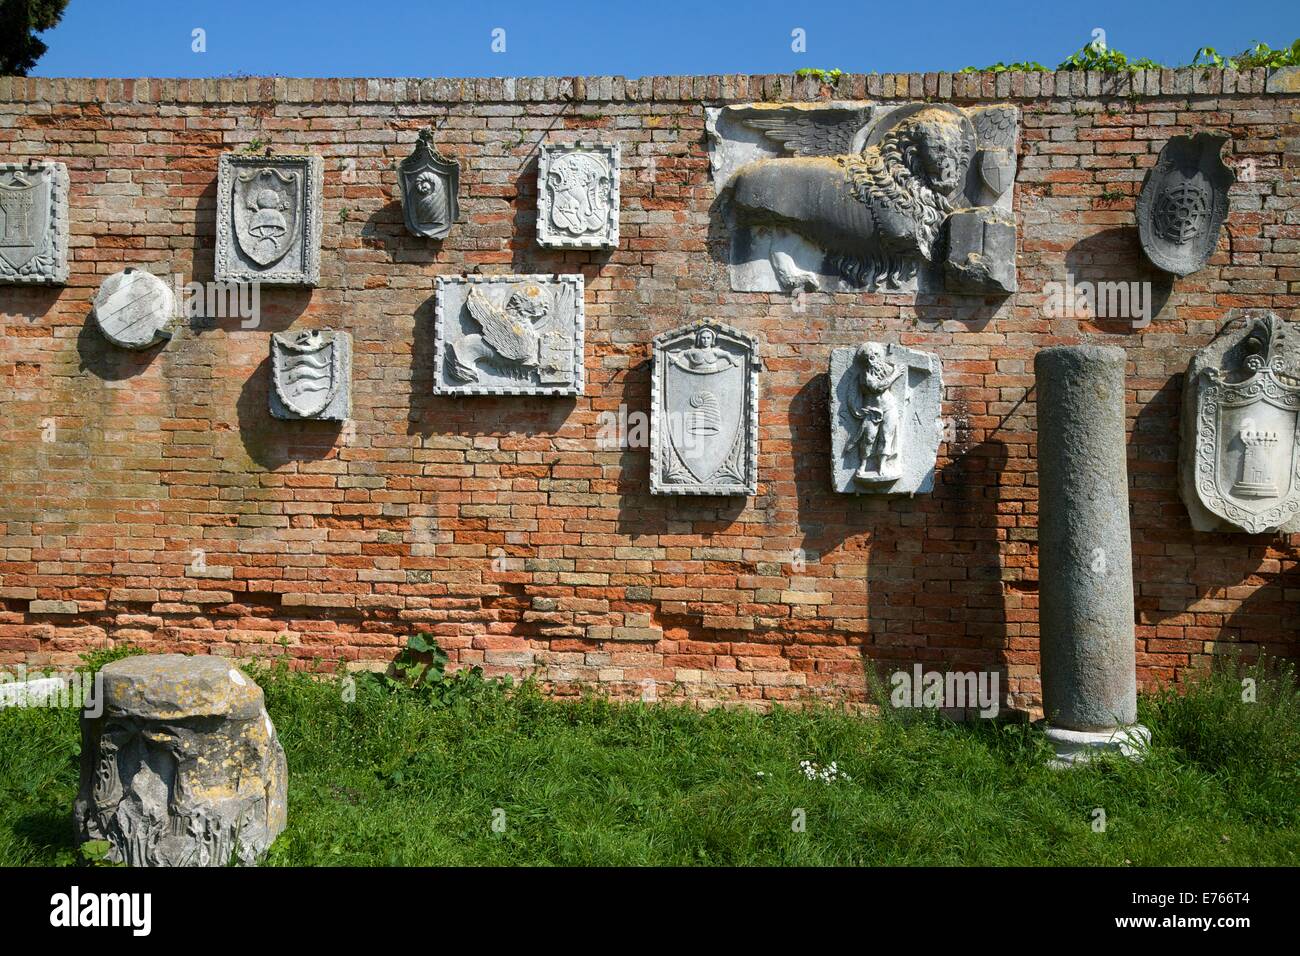 Stone carvings and plaques, Torcello Museum, Cathedral of Santa Maria Assunta, Torcello, Venice, Italy Stock Photo